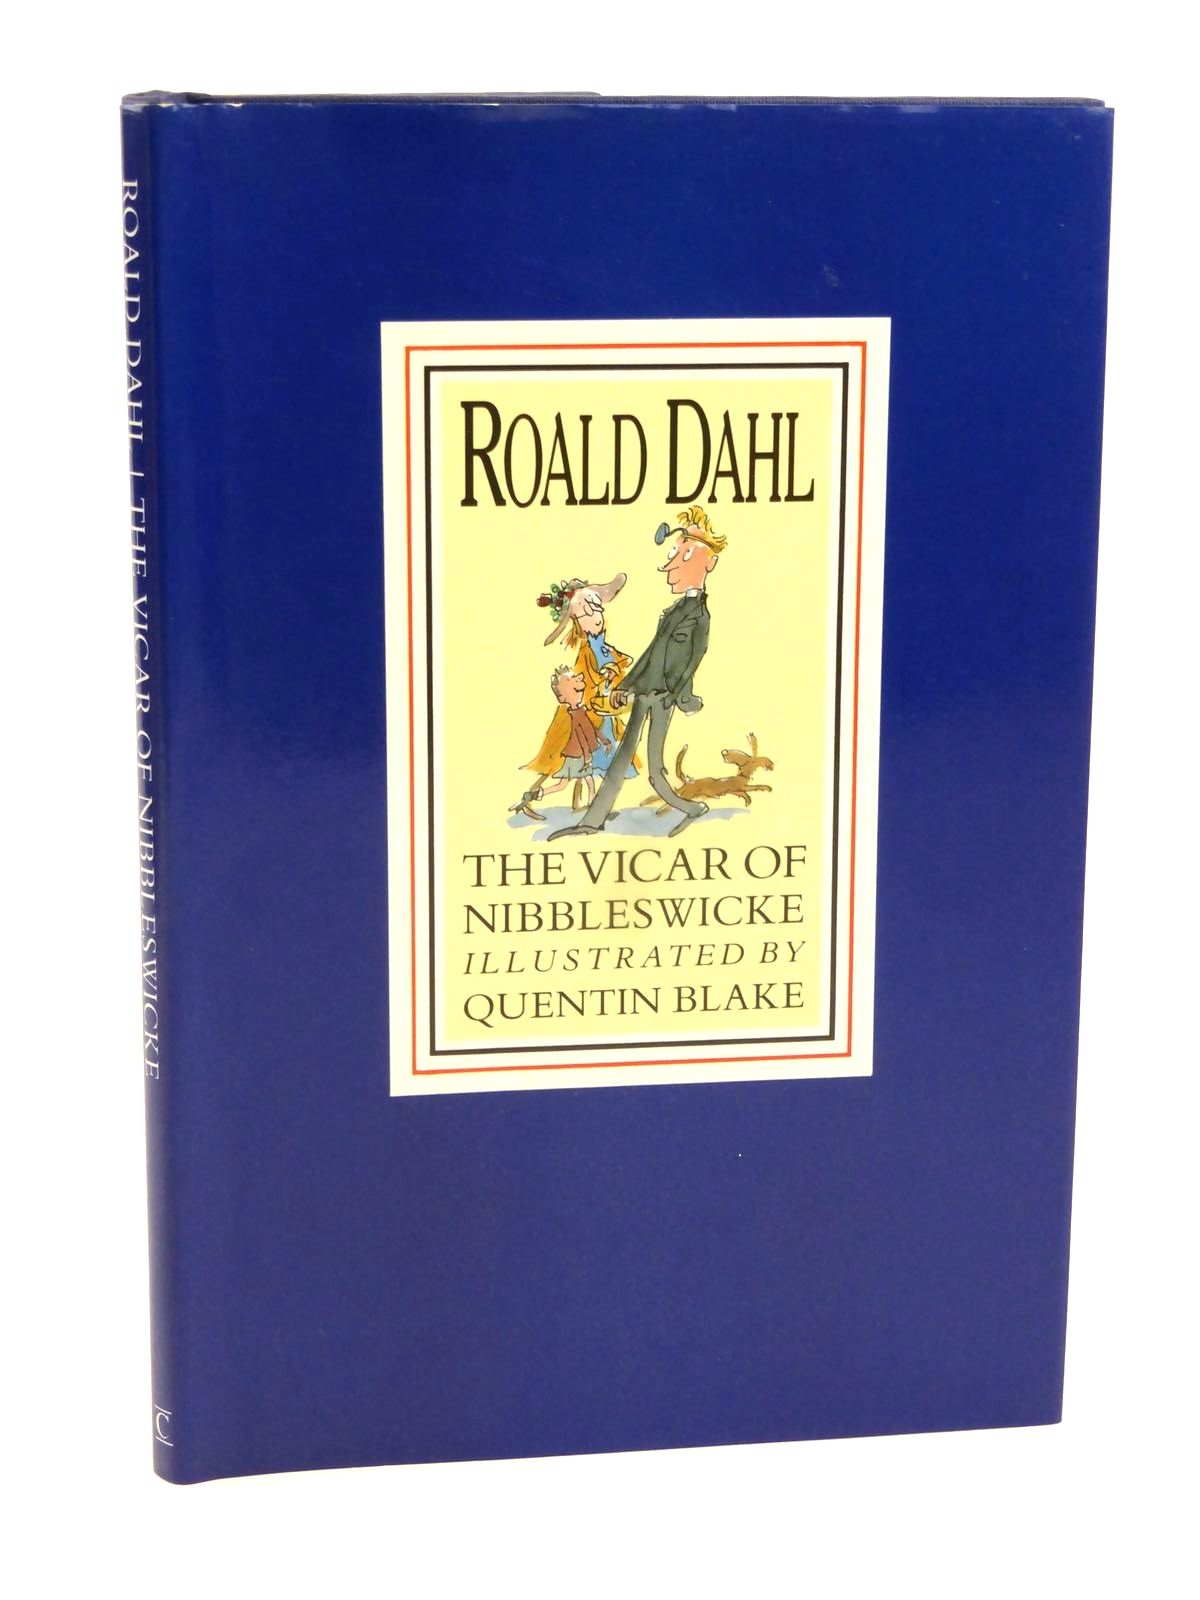 Photo of THE VICAR OF NIBBLESWICKE written by Dahl, Roald illustrated by Blake, Quentin published by Century Publishing (STOCK CODE: 1318045)  for sale by Stella & Rose's Books